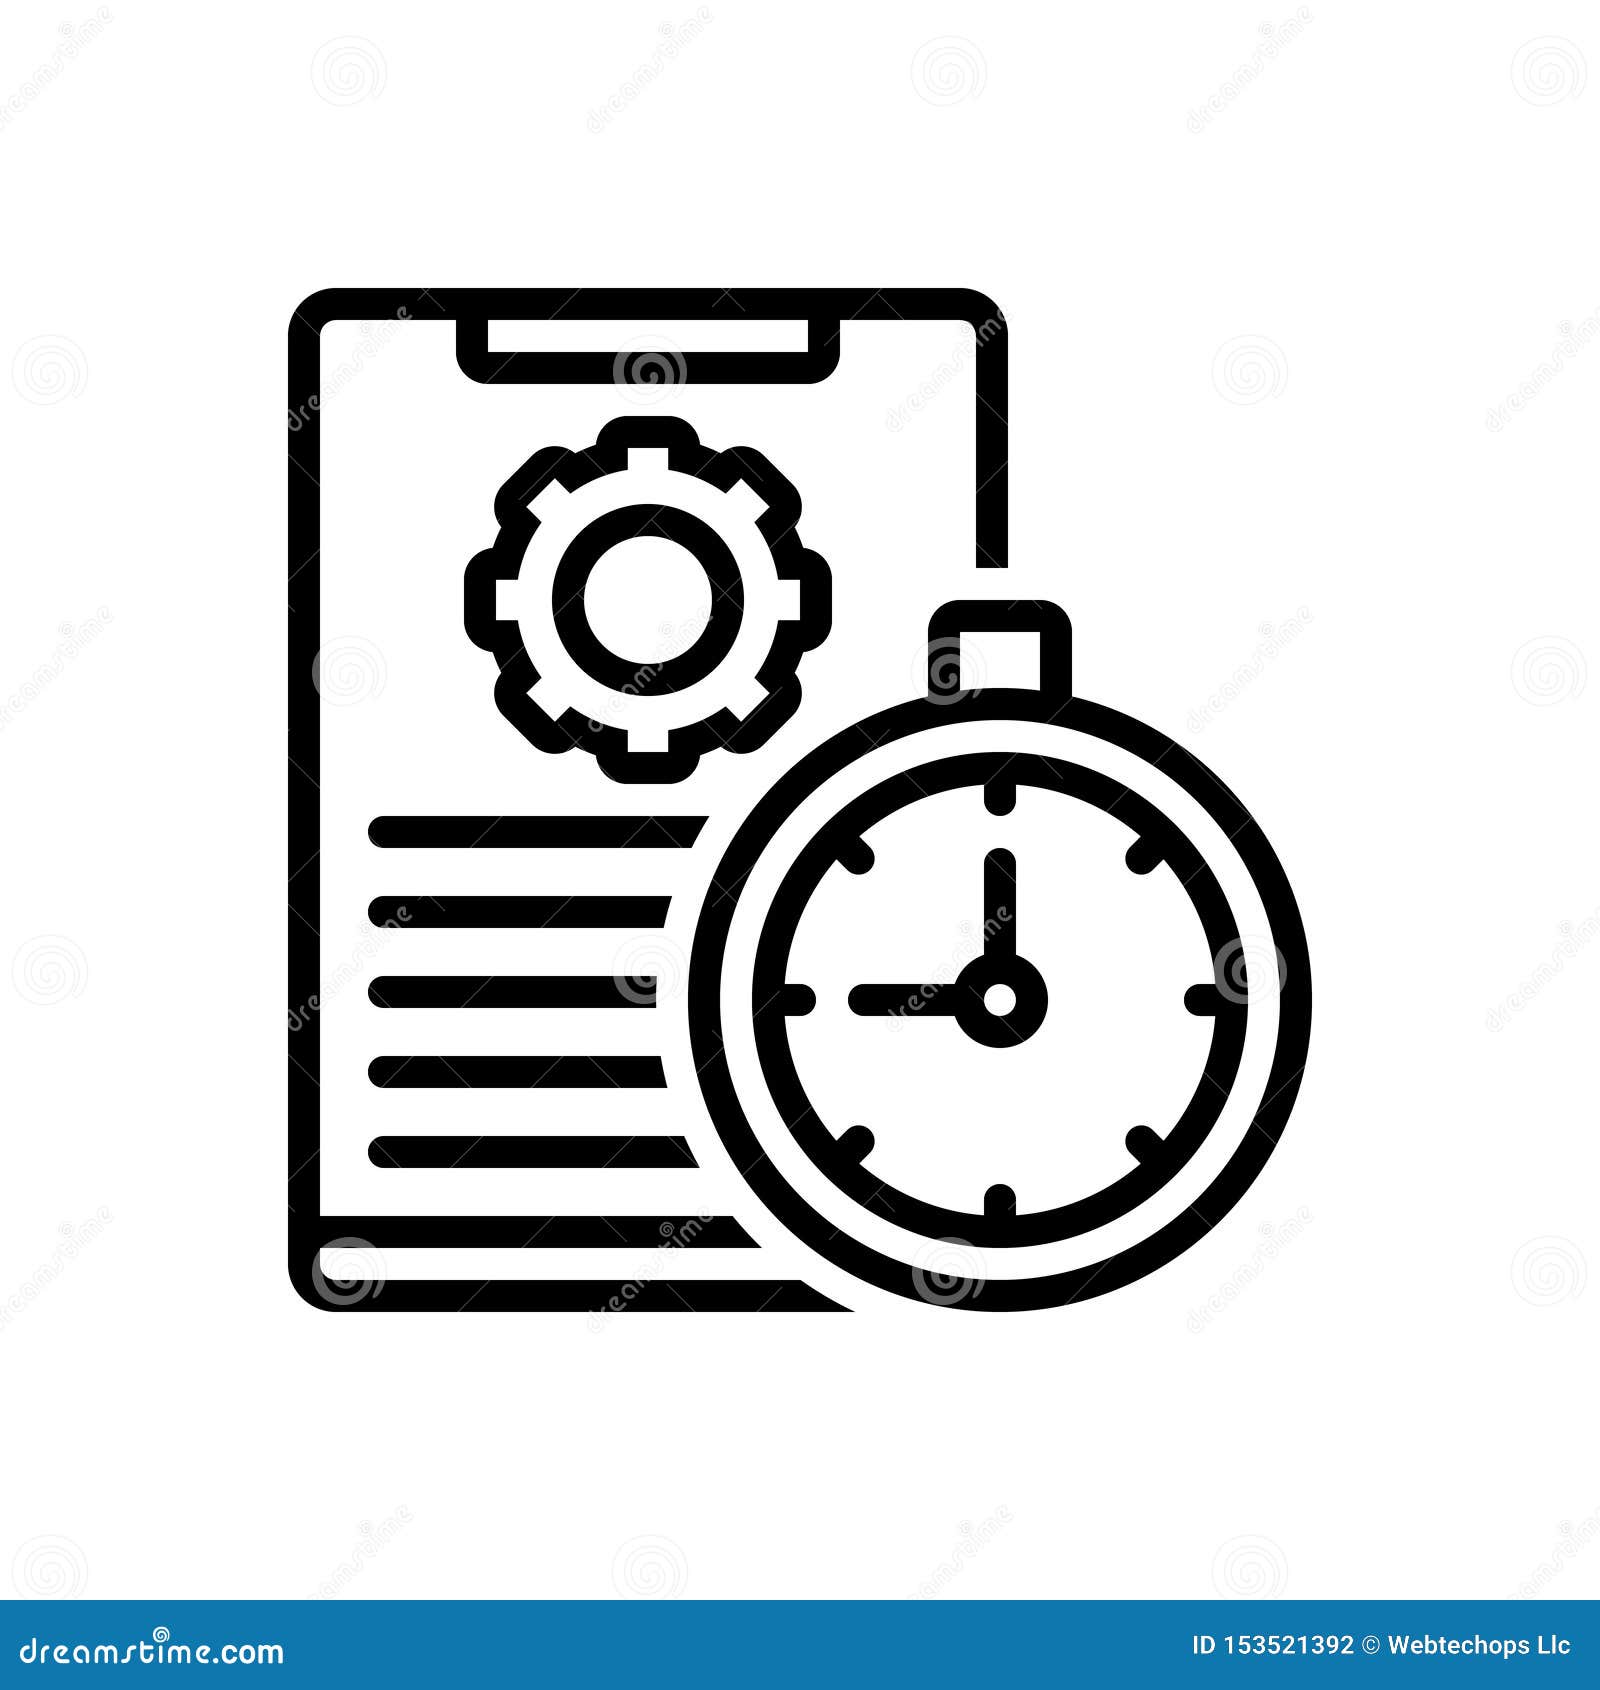 black line icon for time management, organize and document